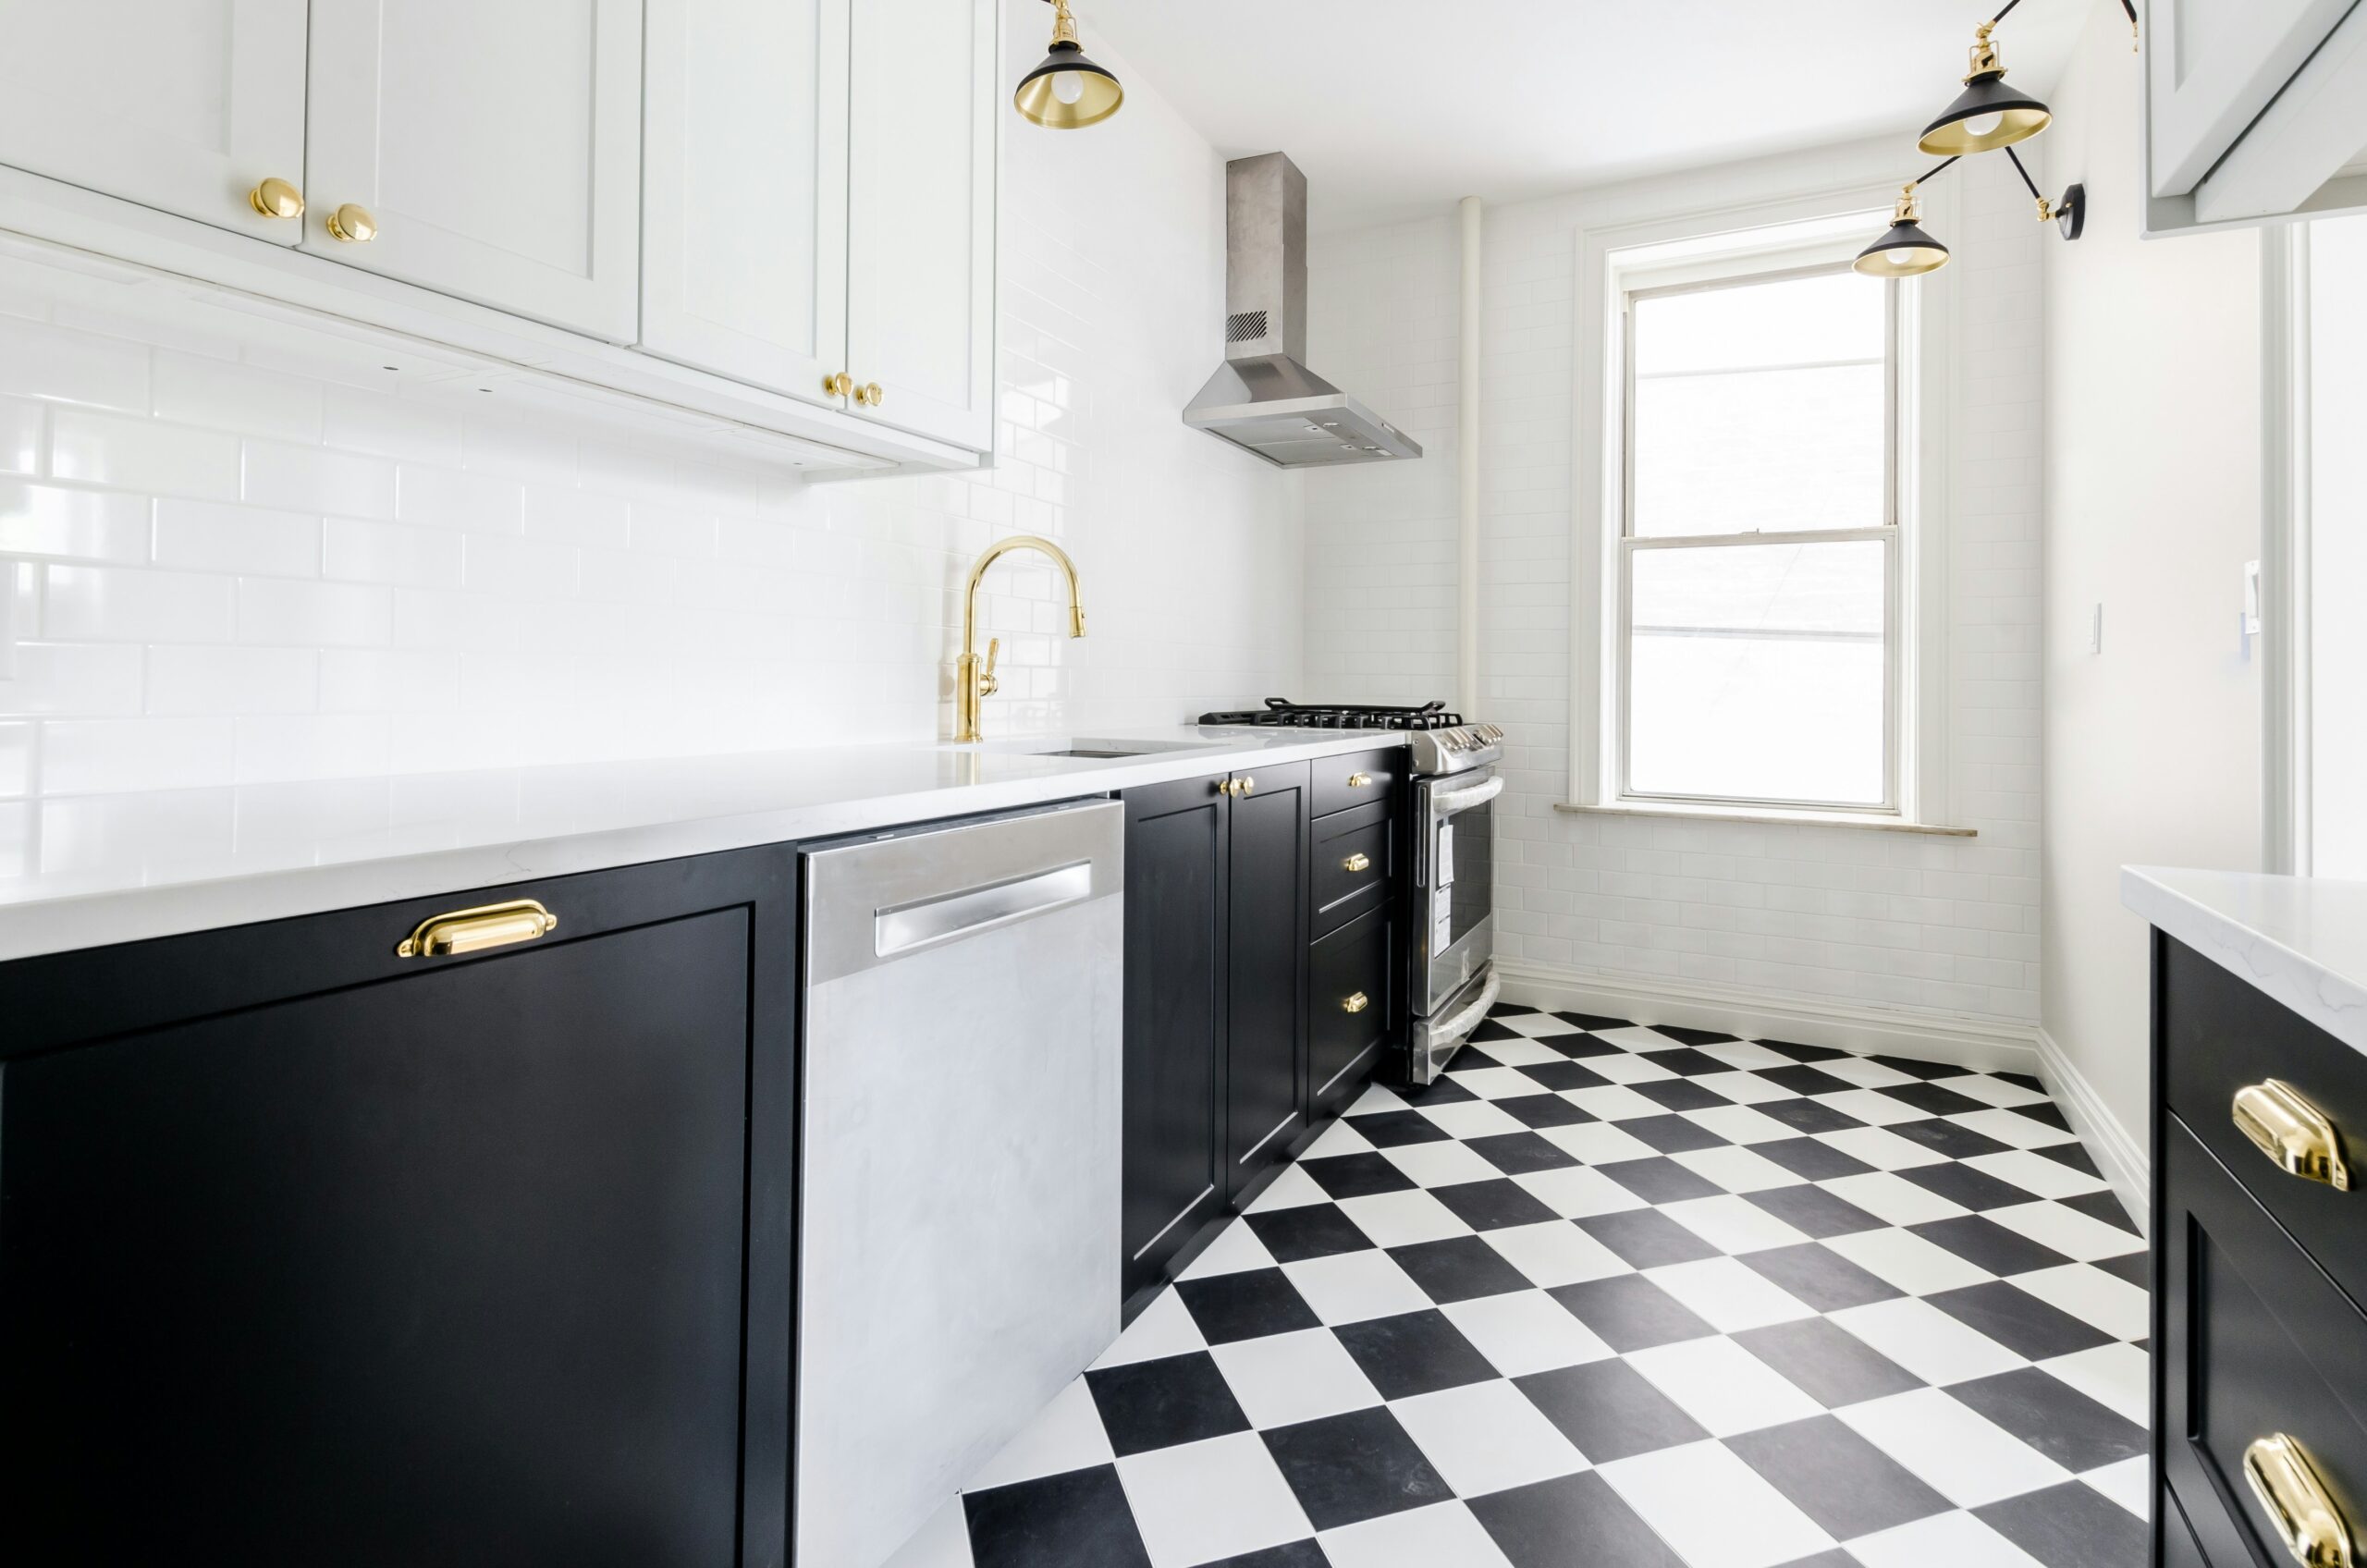 Go with trendy tile for chic and stylish kitchen floor ideas. Pictured: Kitchen tile.